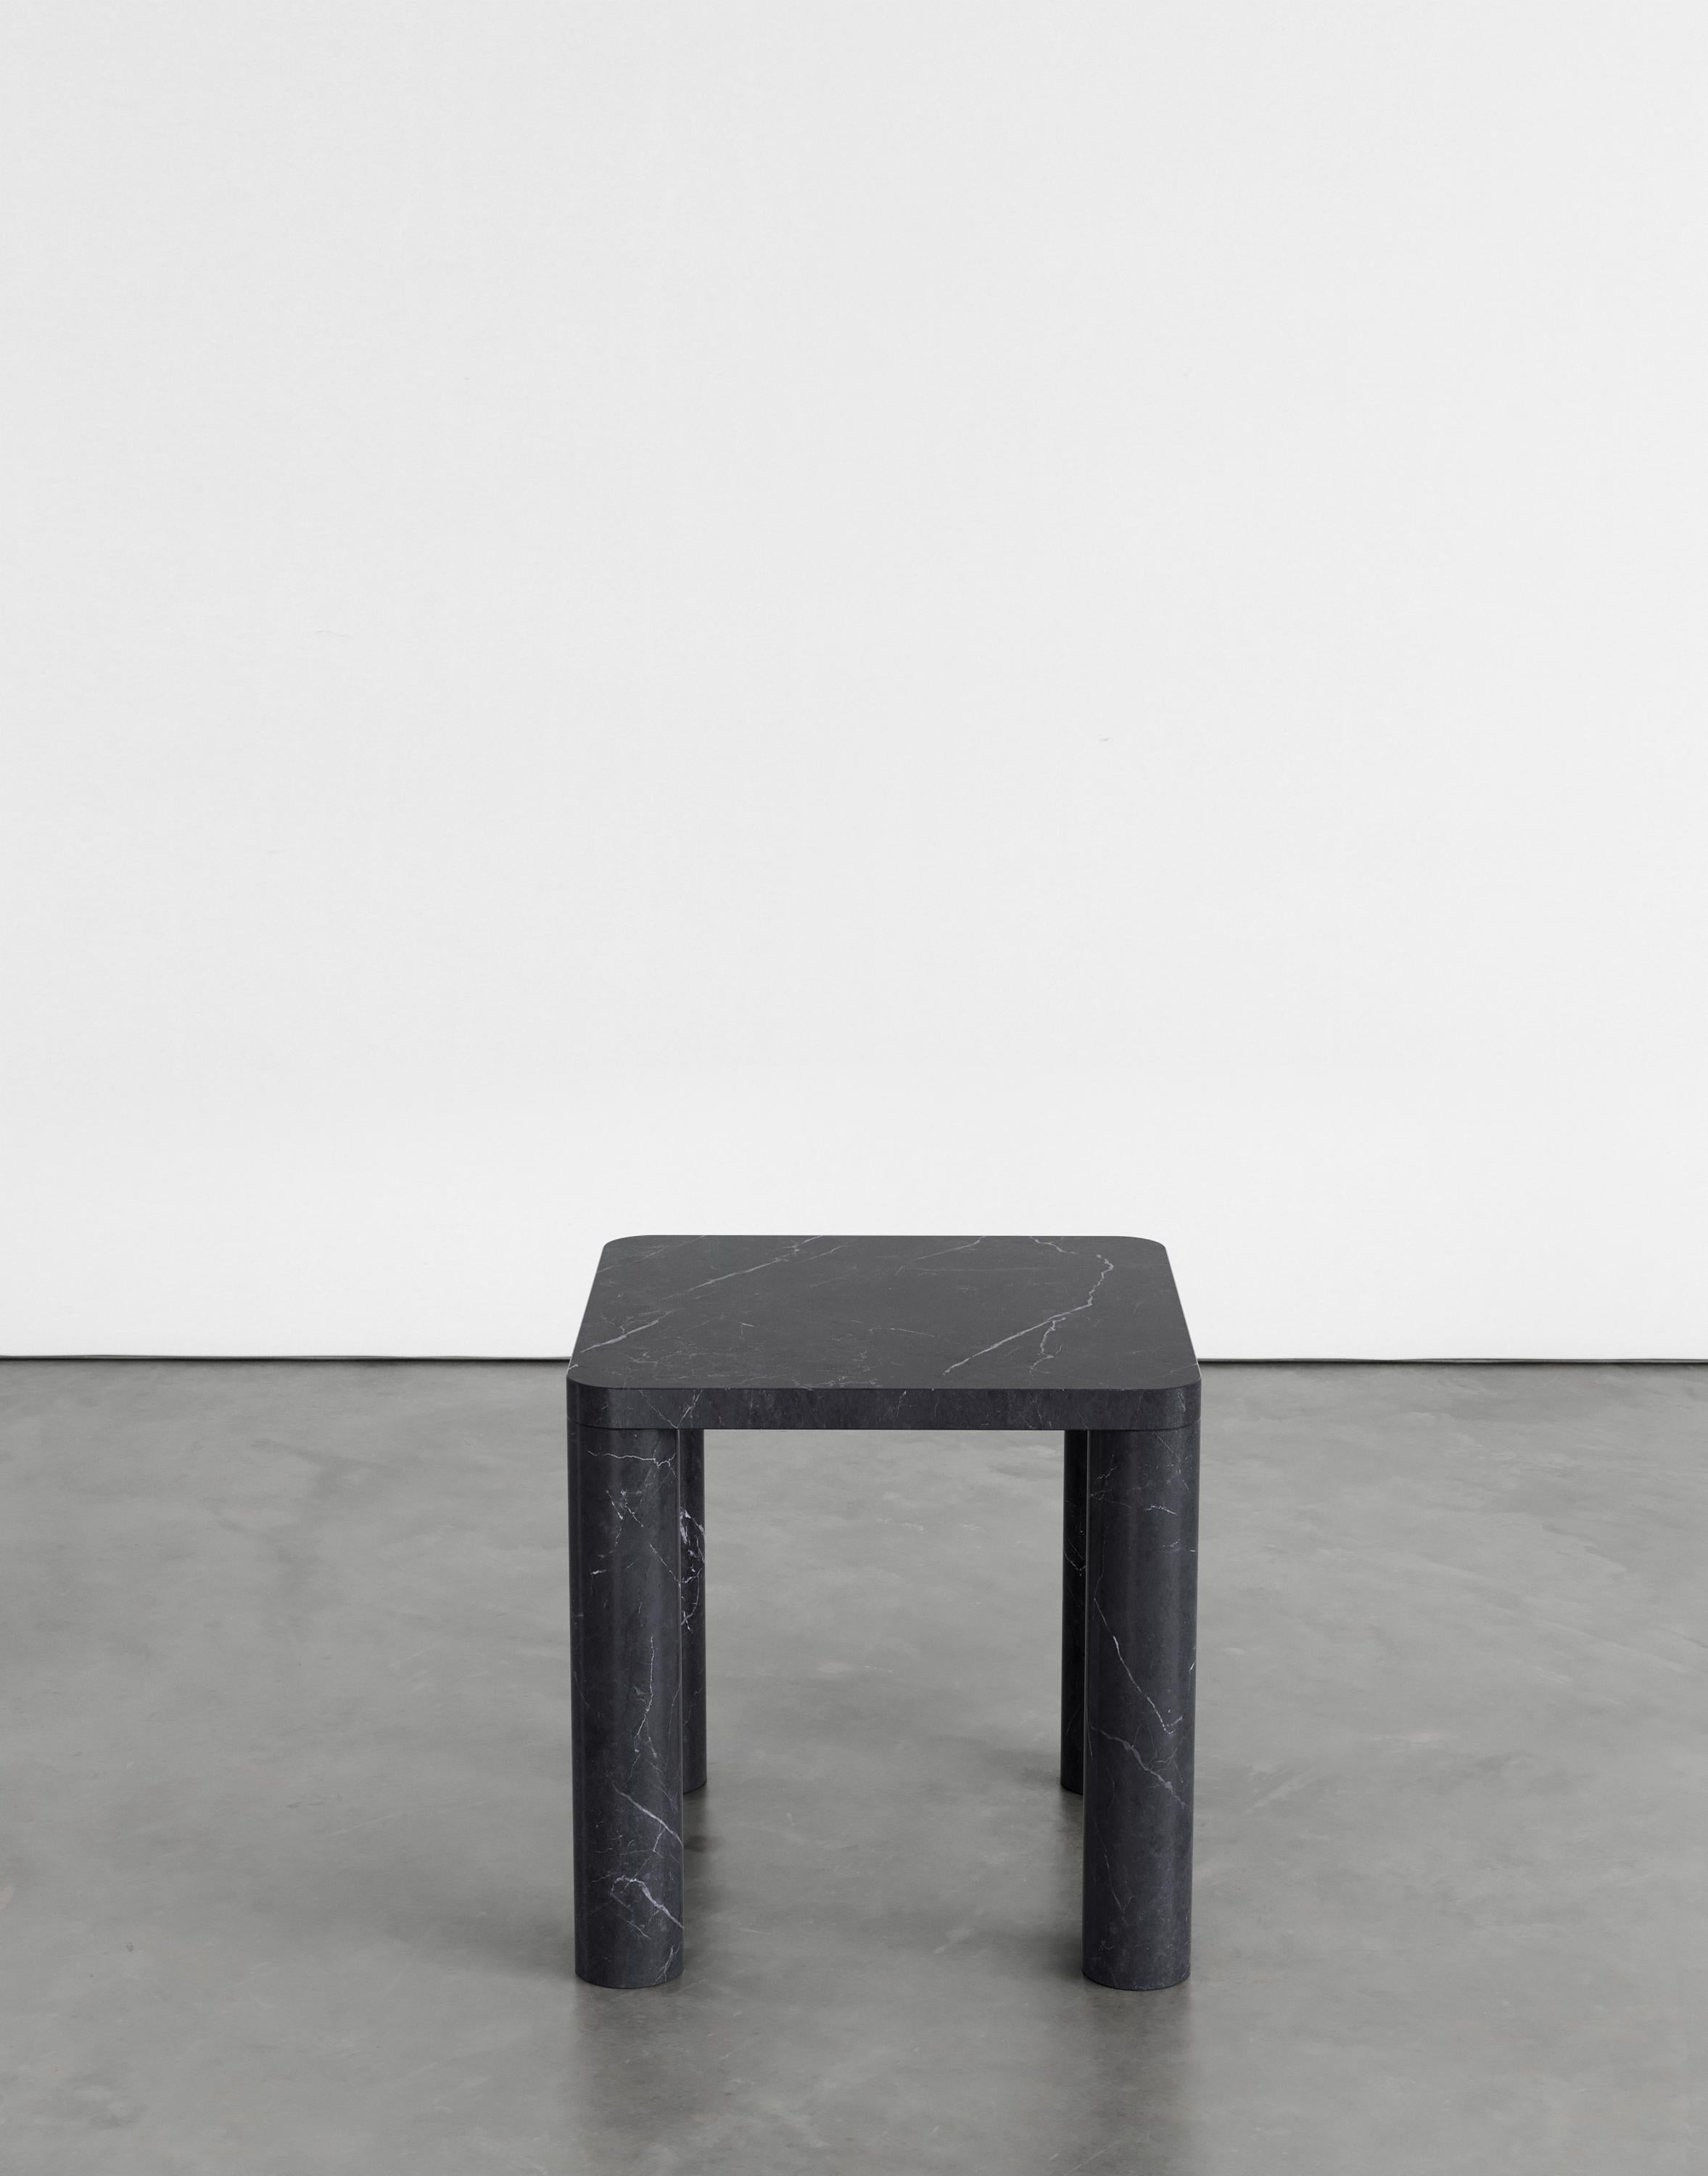 Nadia 45 side table by Agglomerati 
Dimensions: D 45 x W 45 x H 45 cm 
Materials: Black Marquina. Available in other stones. 

Agglomerati is a London-based studio creating distinctive stone furniture. Established in 2019 by Australian designer